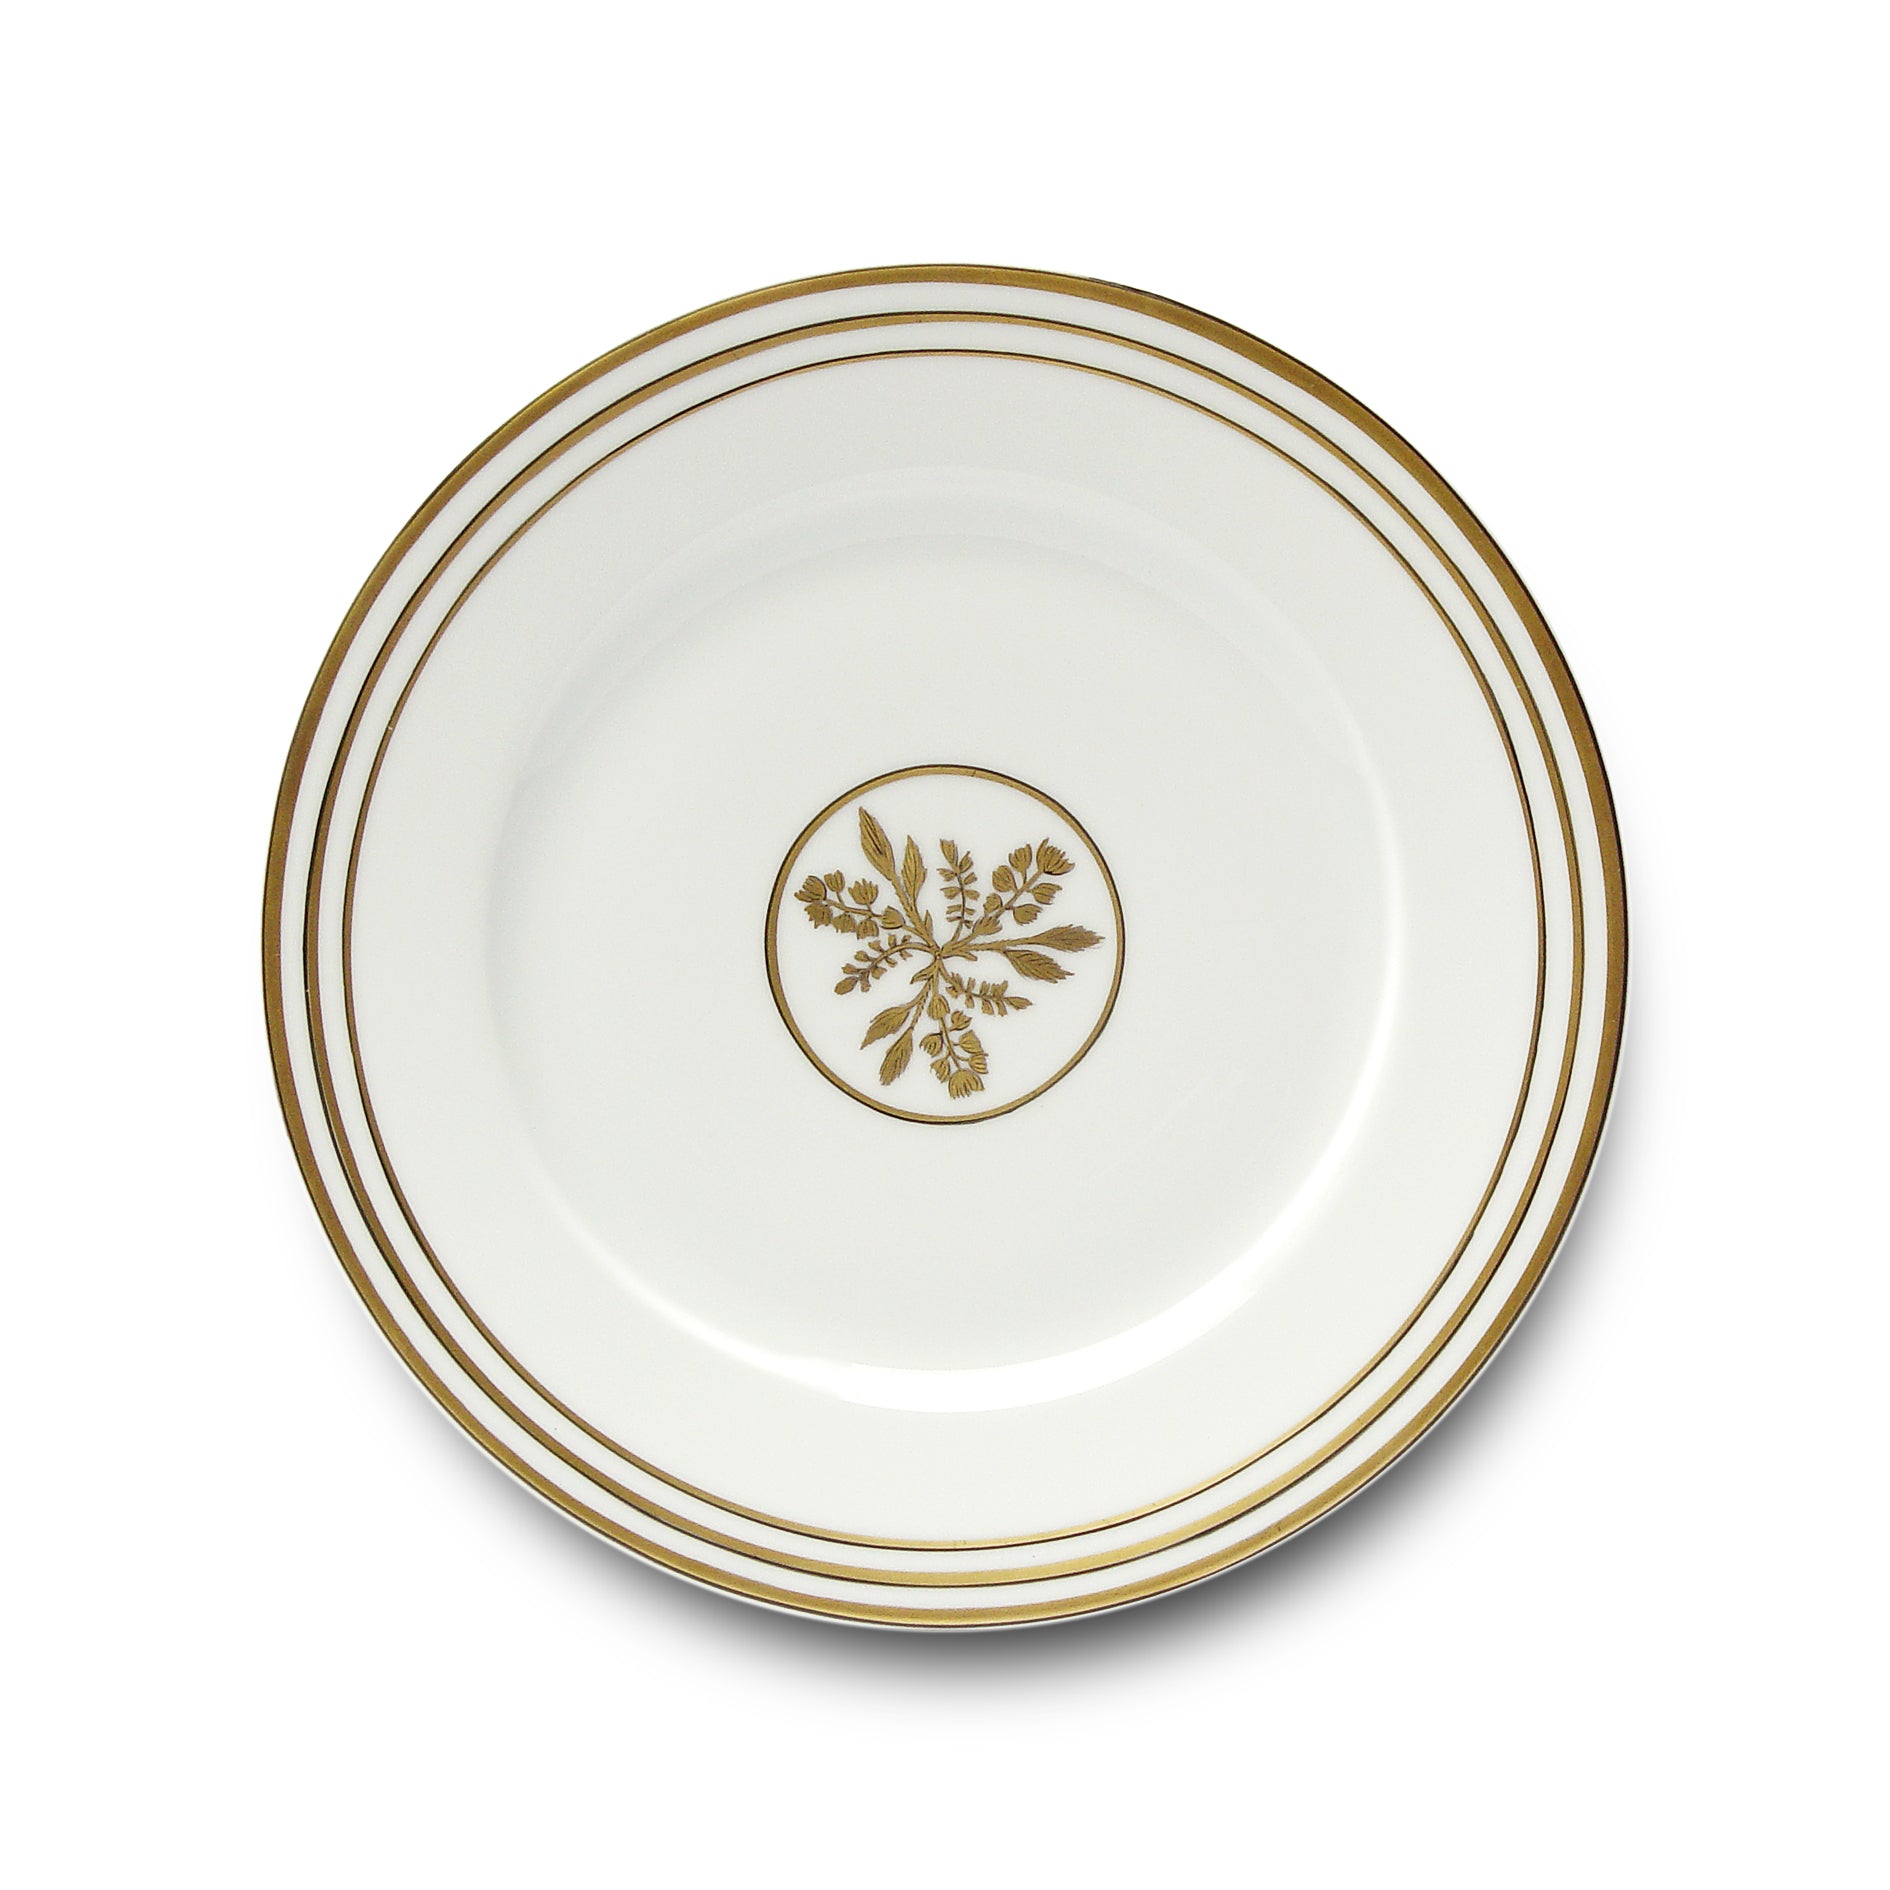 Or des Airs - Or des Mers - Dinner plate 05